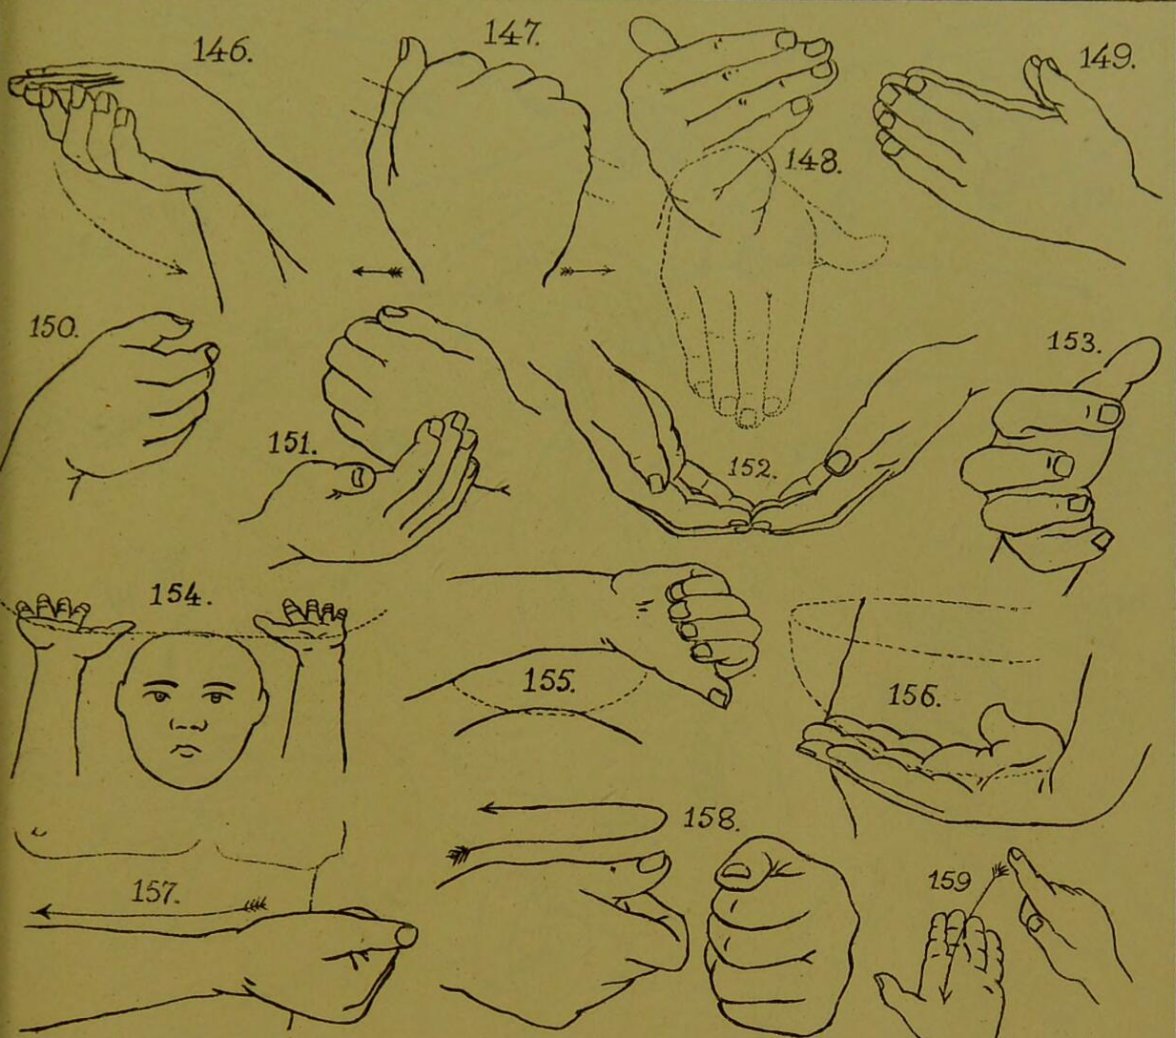 Figures from Roth's 1897 monograph on an Aboriginal (alternate) sign language used in Queensland, Australia. Love the fletching on those arrows! (Source:  https://wellcomecollection.org/works/z74yavfk/ )